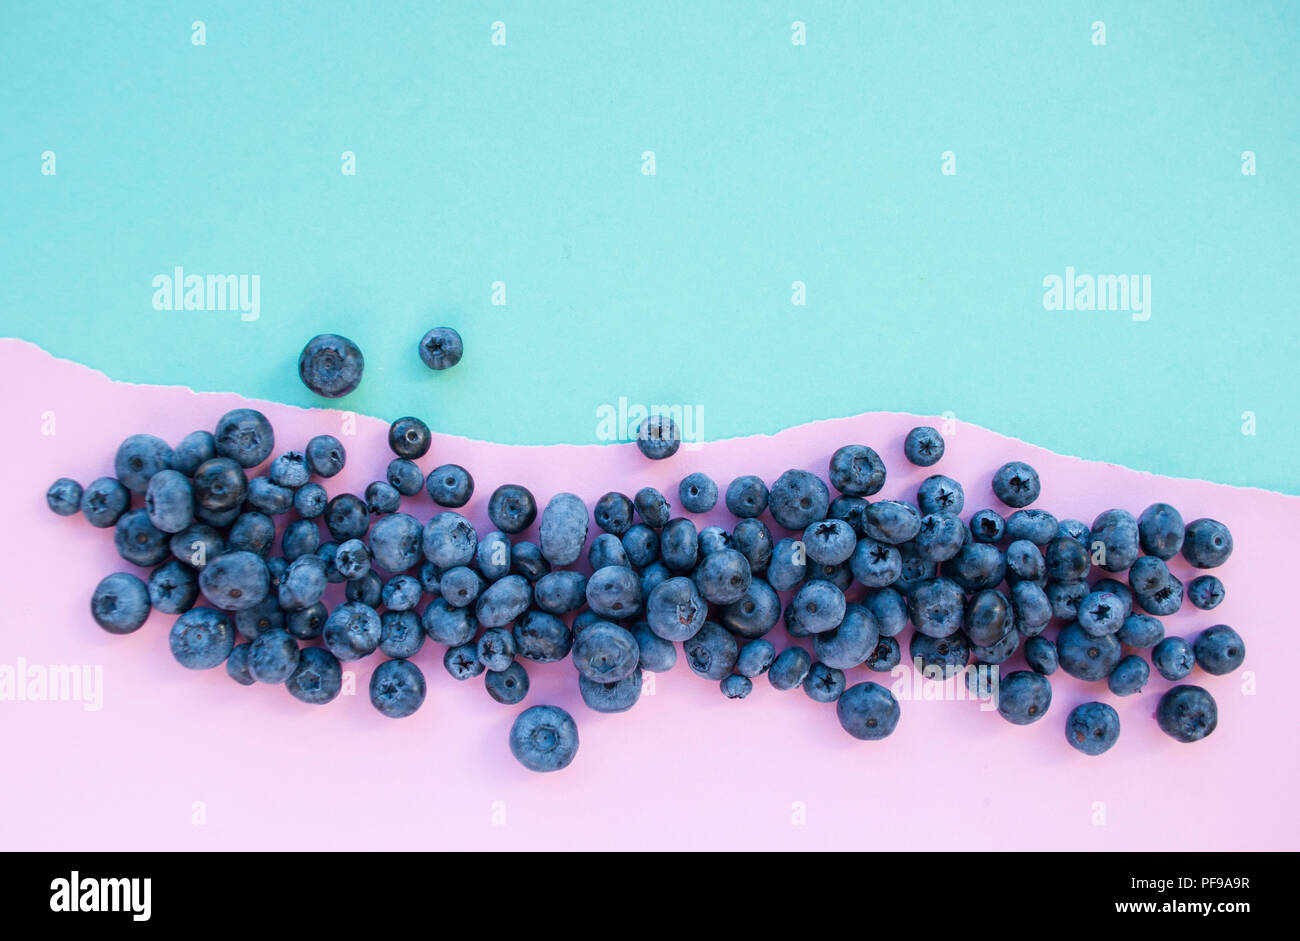 Delicious freshly picked bluberry on blue and piink background with ...